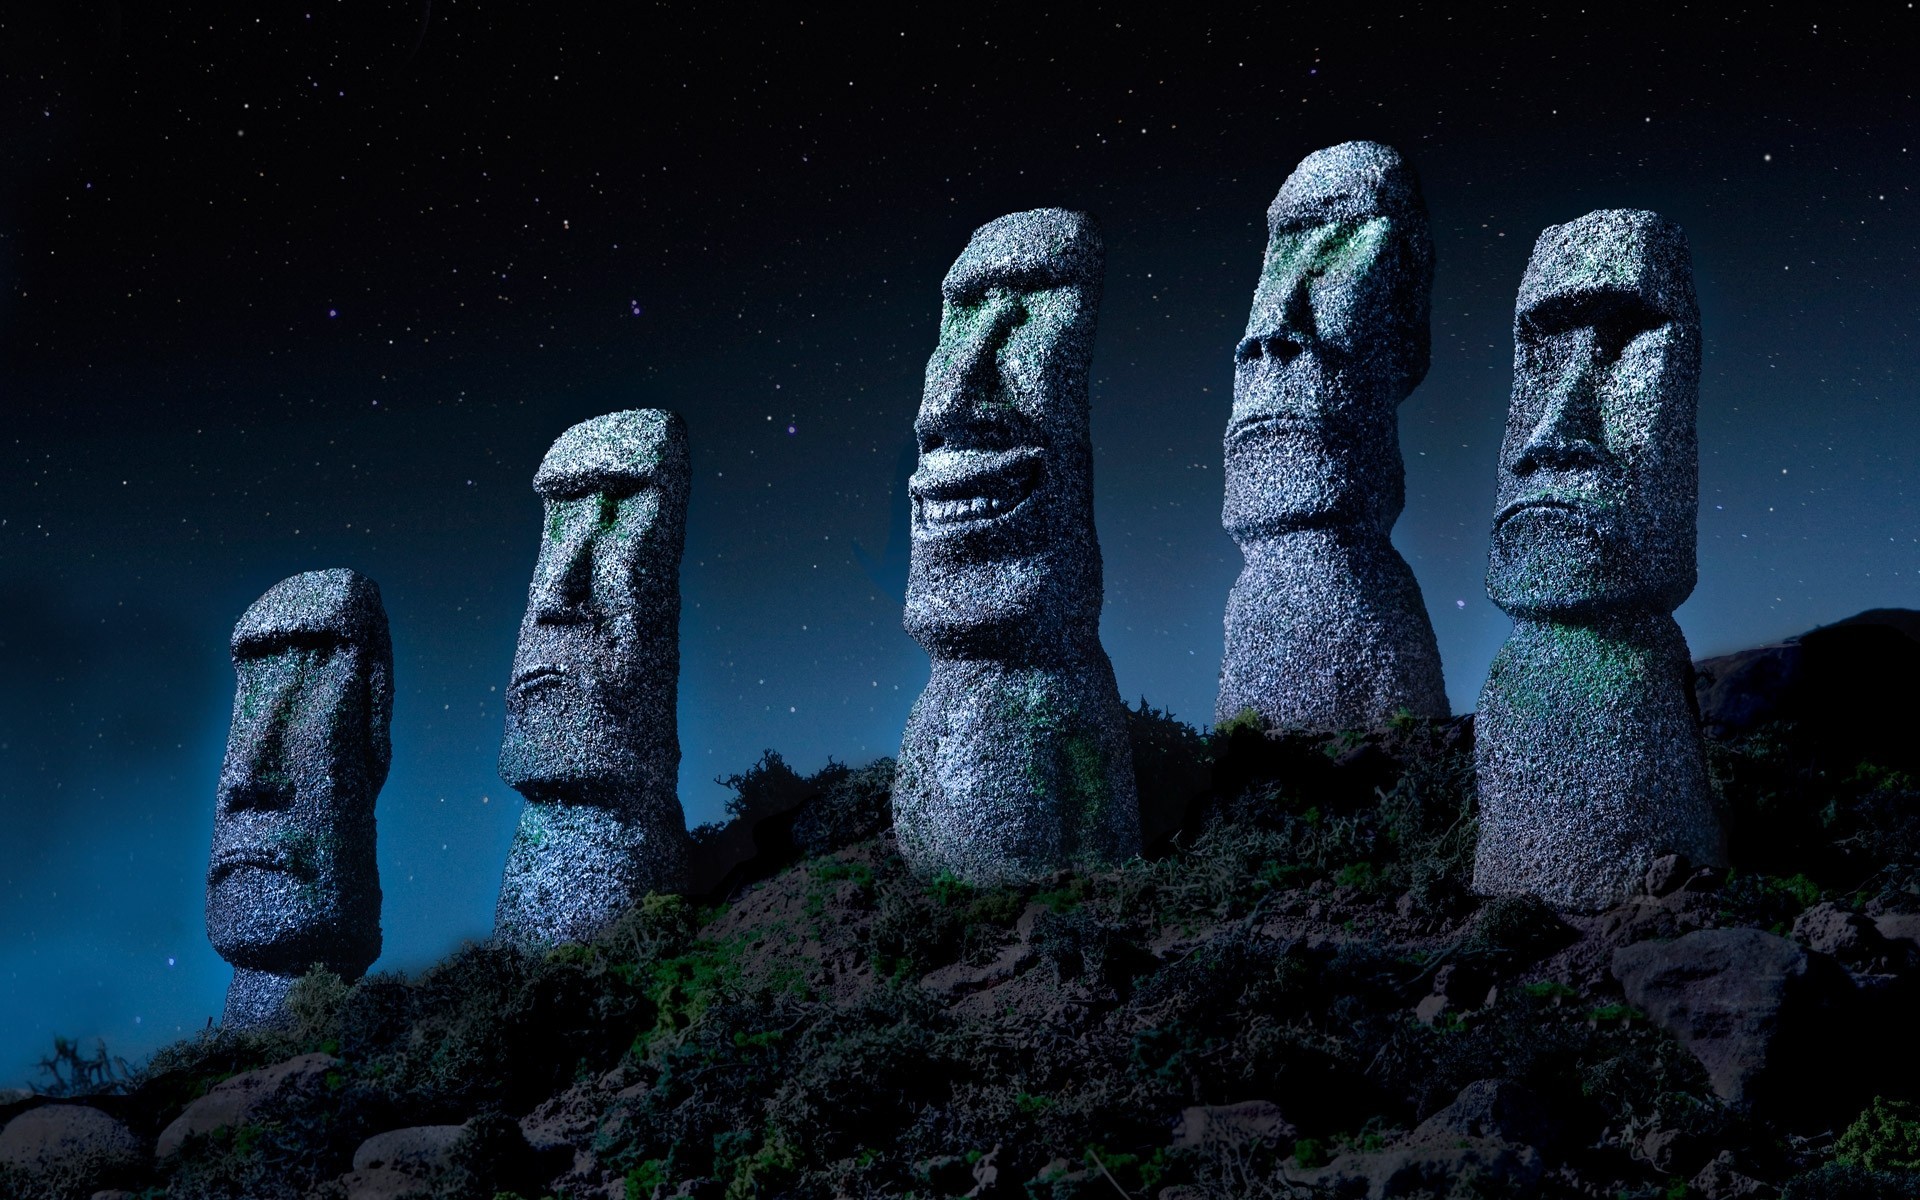 1920x1200 General  Easter Island Chile starry night statue Moai giant stone  monuments nature landscape